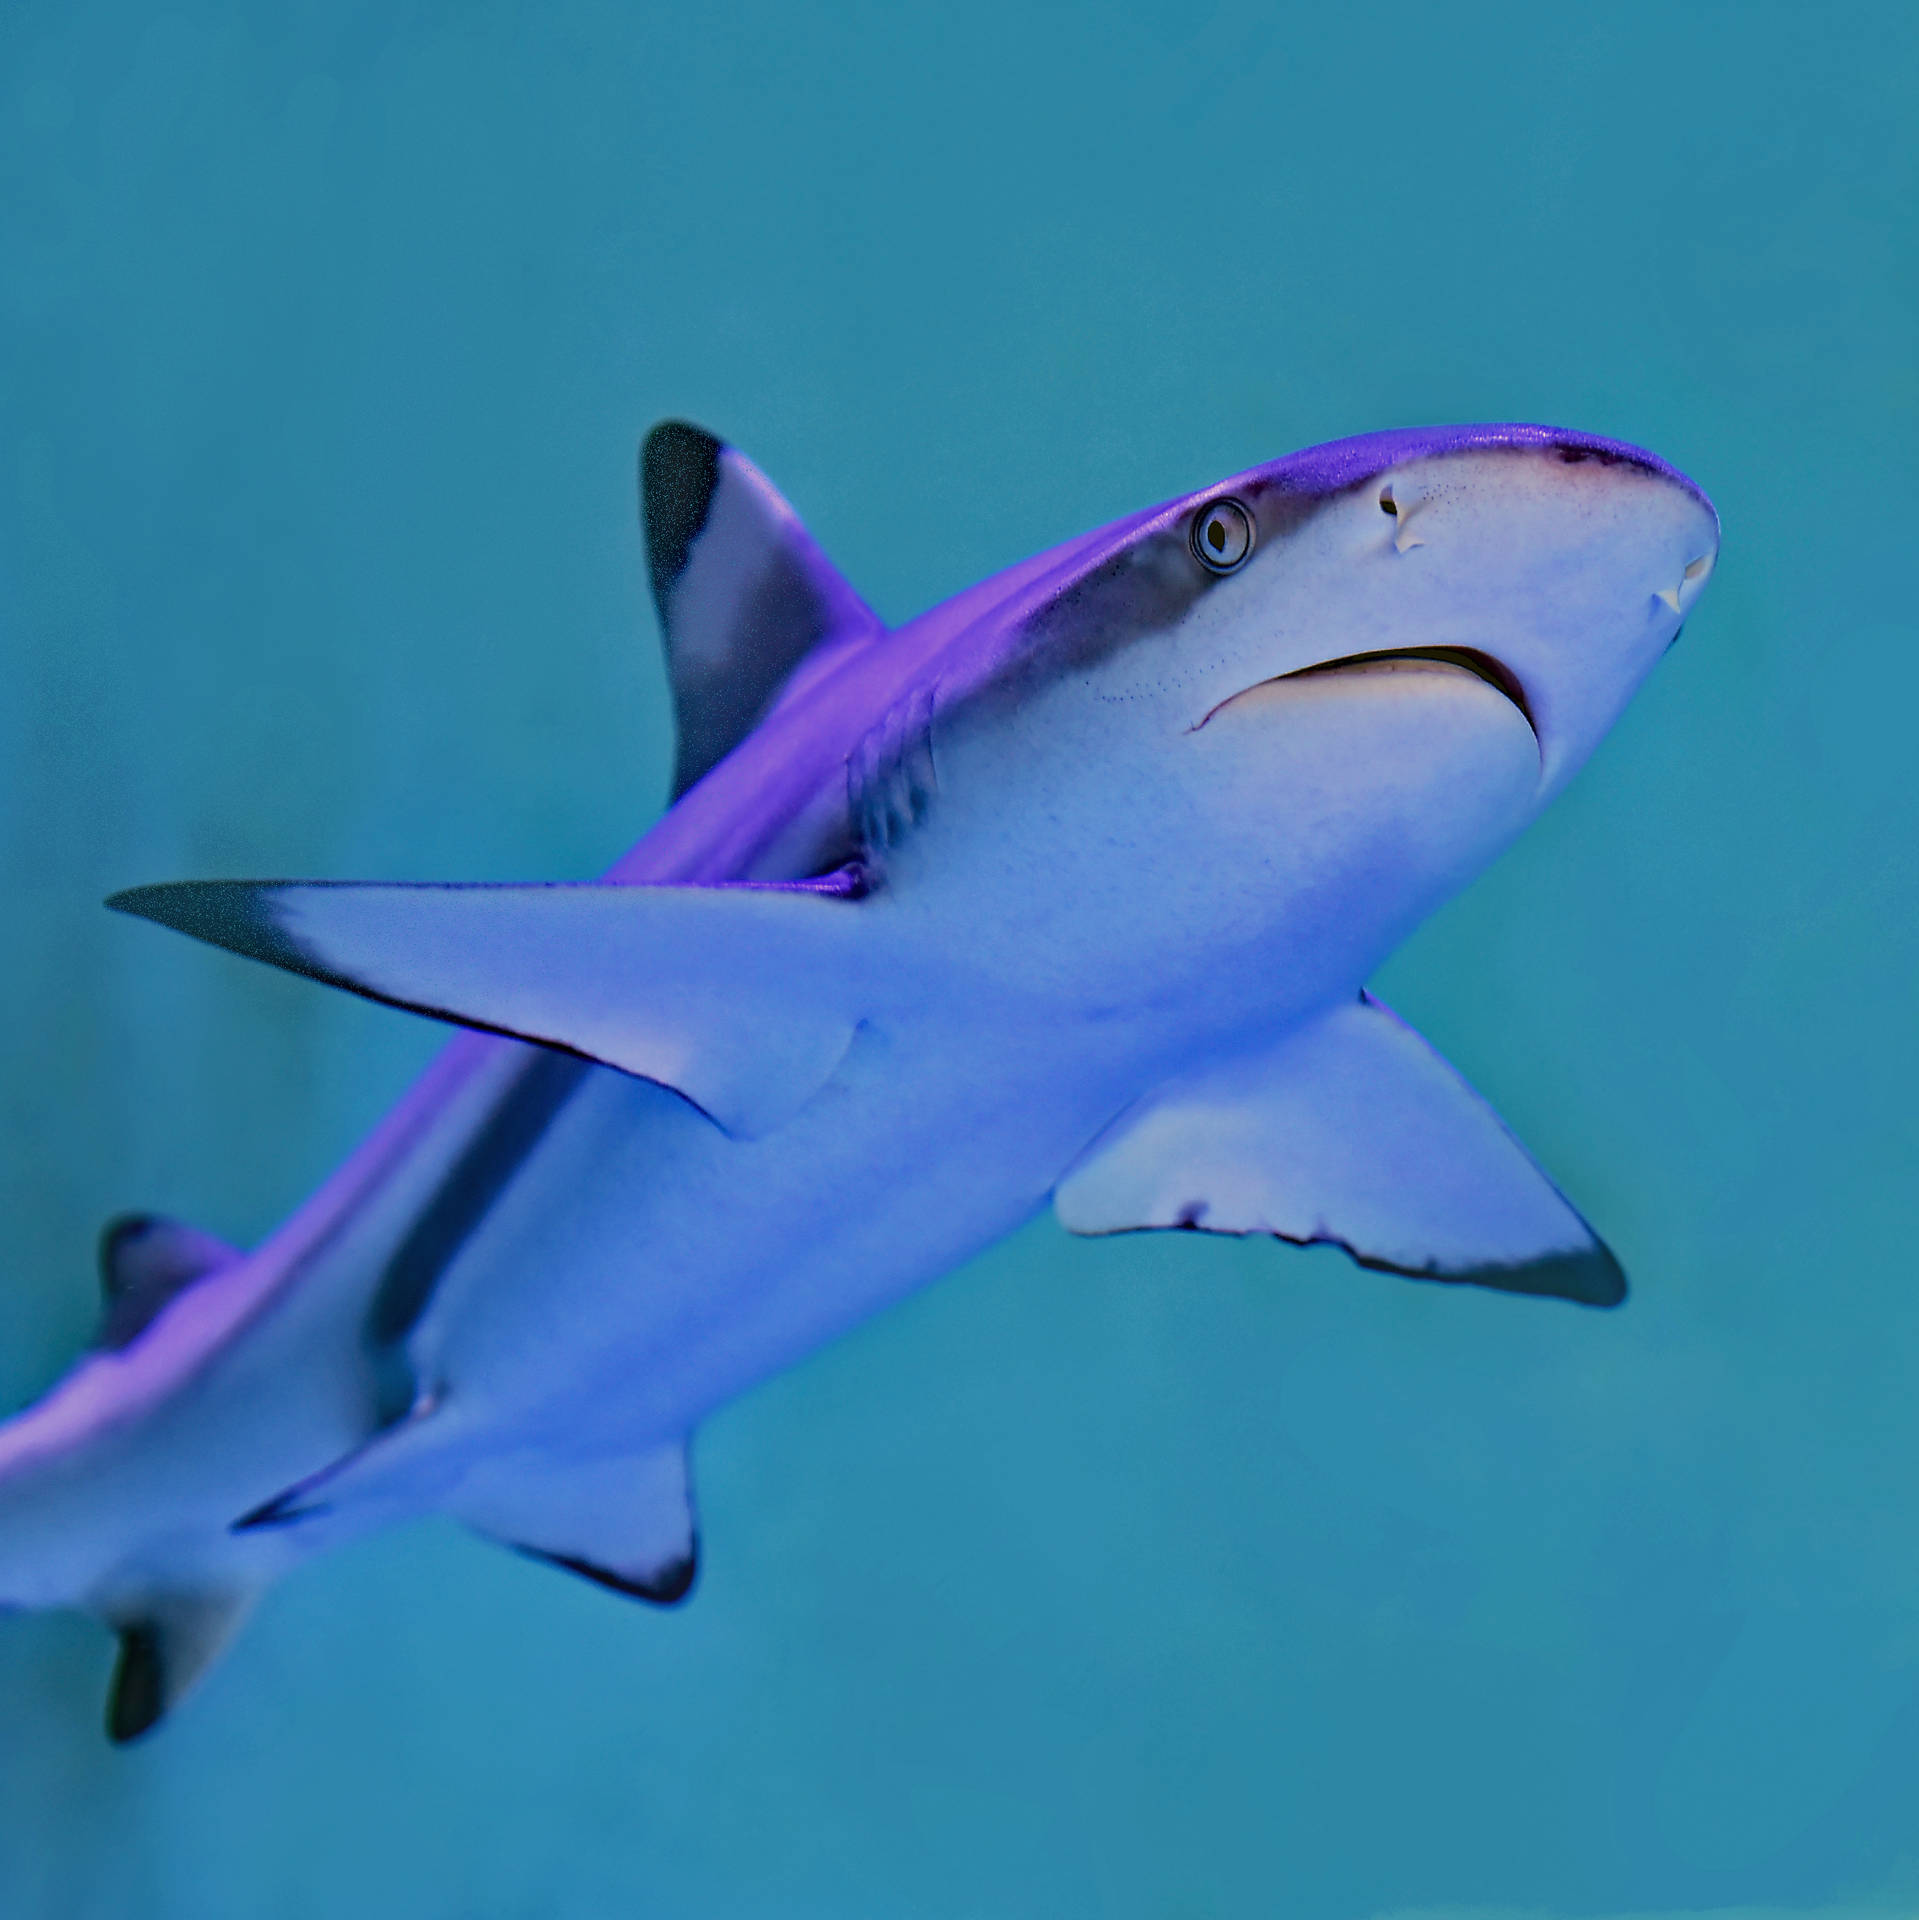 Shark 2846X2847 Wallpaper and Background Image